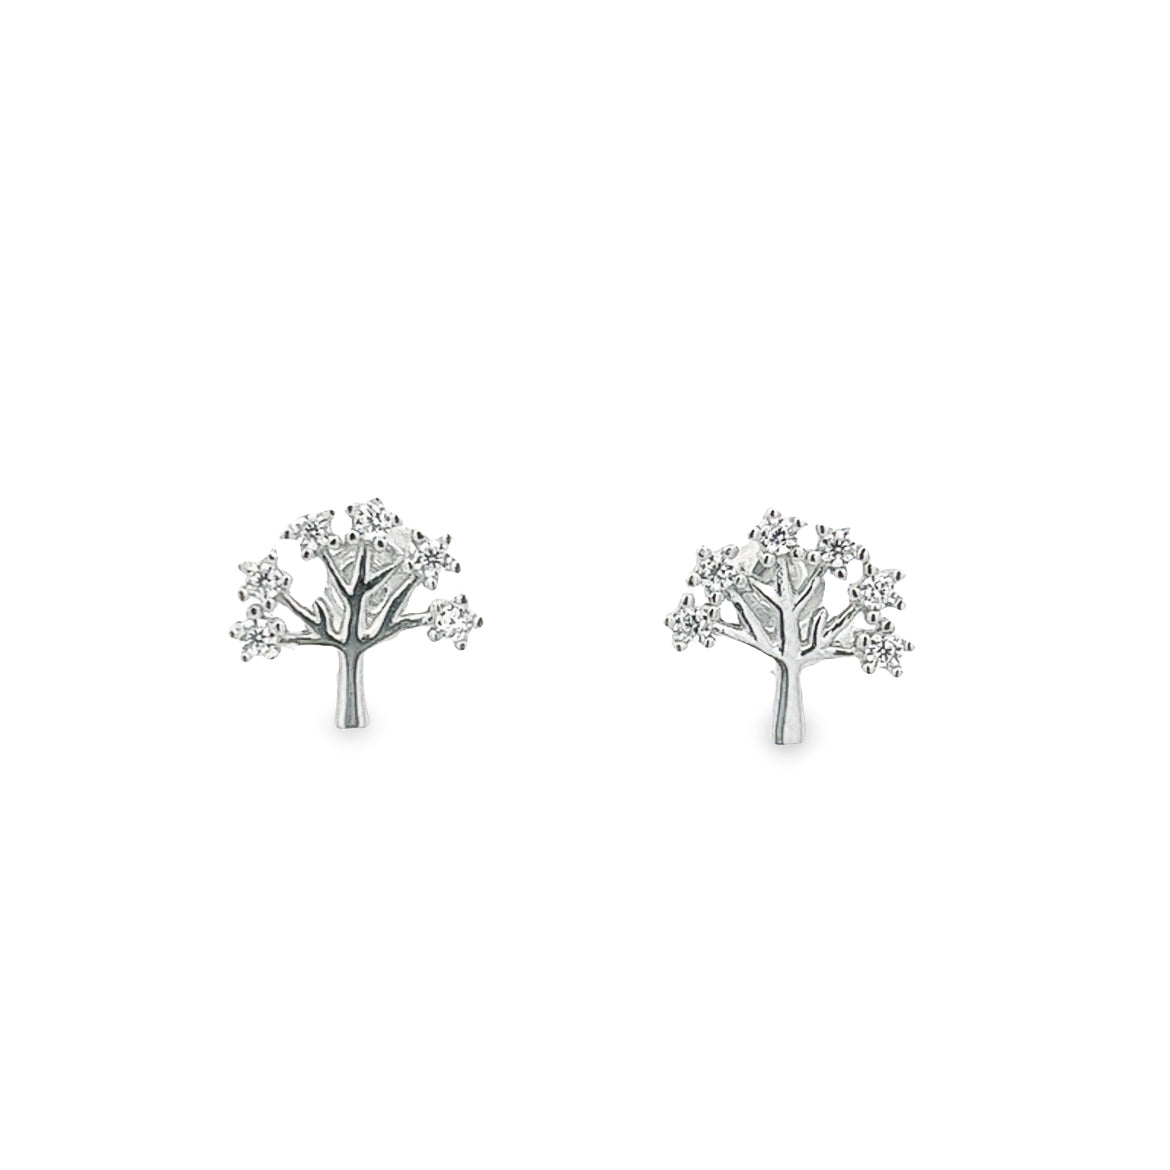 925 SILVER PLATED TREE EARRINGS WITH CRYSTALS